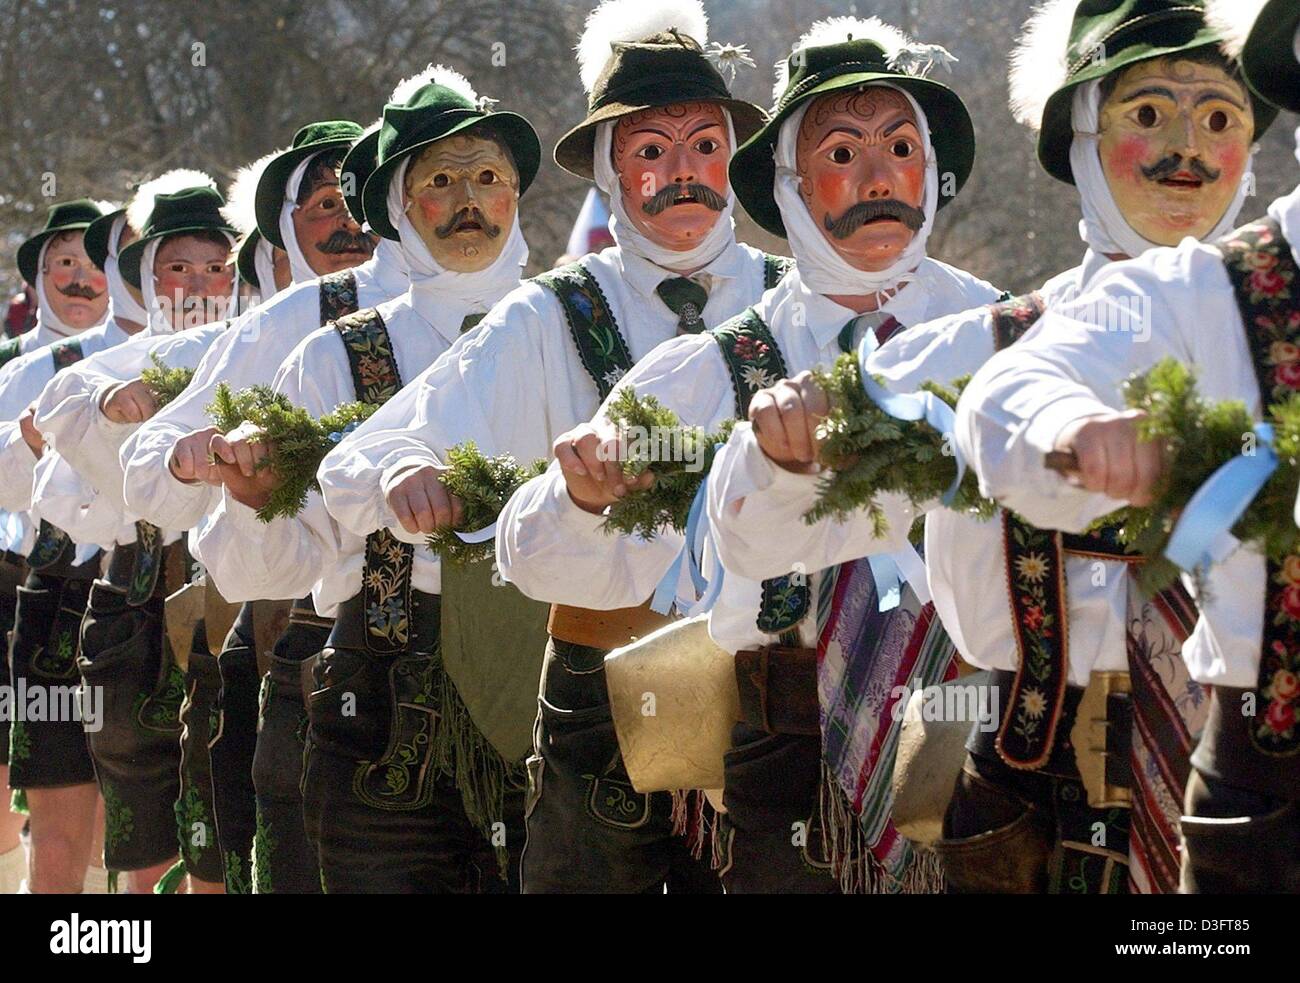 (dpa) - Masked men clad in identical Bavarian lederhosen (leather shorts) parade along a street while ringing cow bells in Mittenwald, Bavaria, Germany, 27 February 2003. As a carnival tradition, these 'bell stirrers' ('Schellenruehrer') and their noise are meant to scare off the mean winter demons. Stock Photo